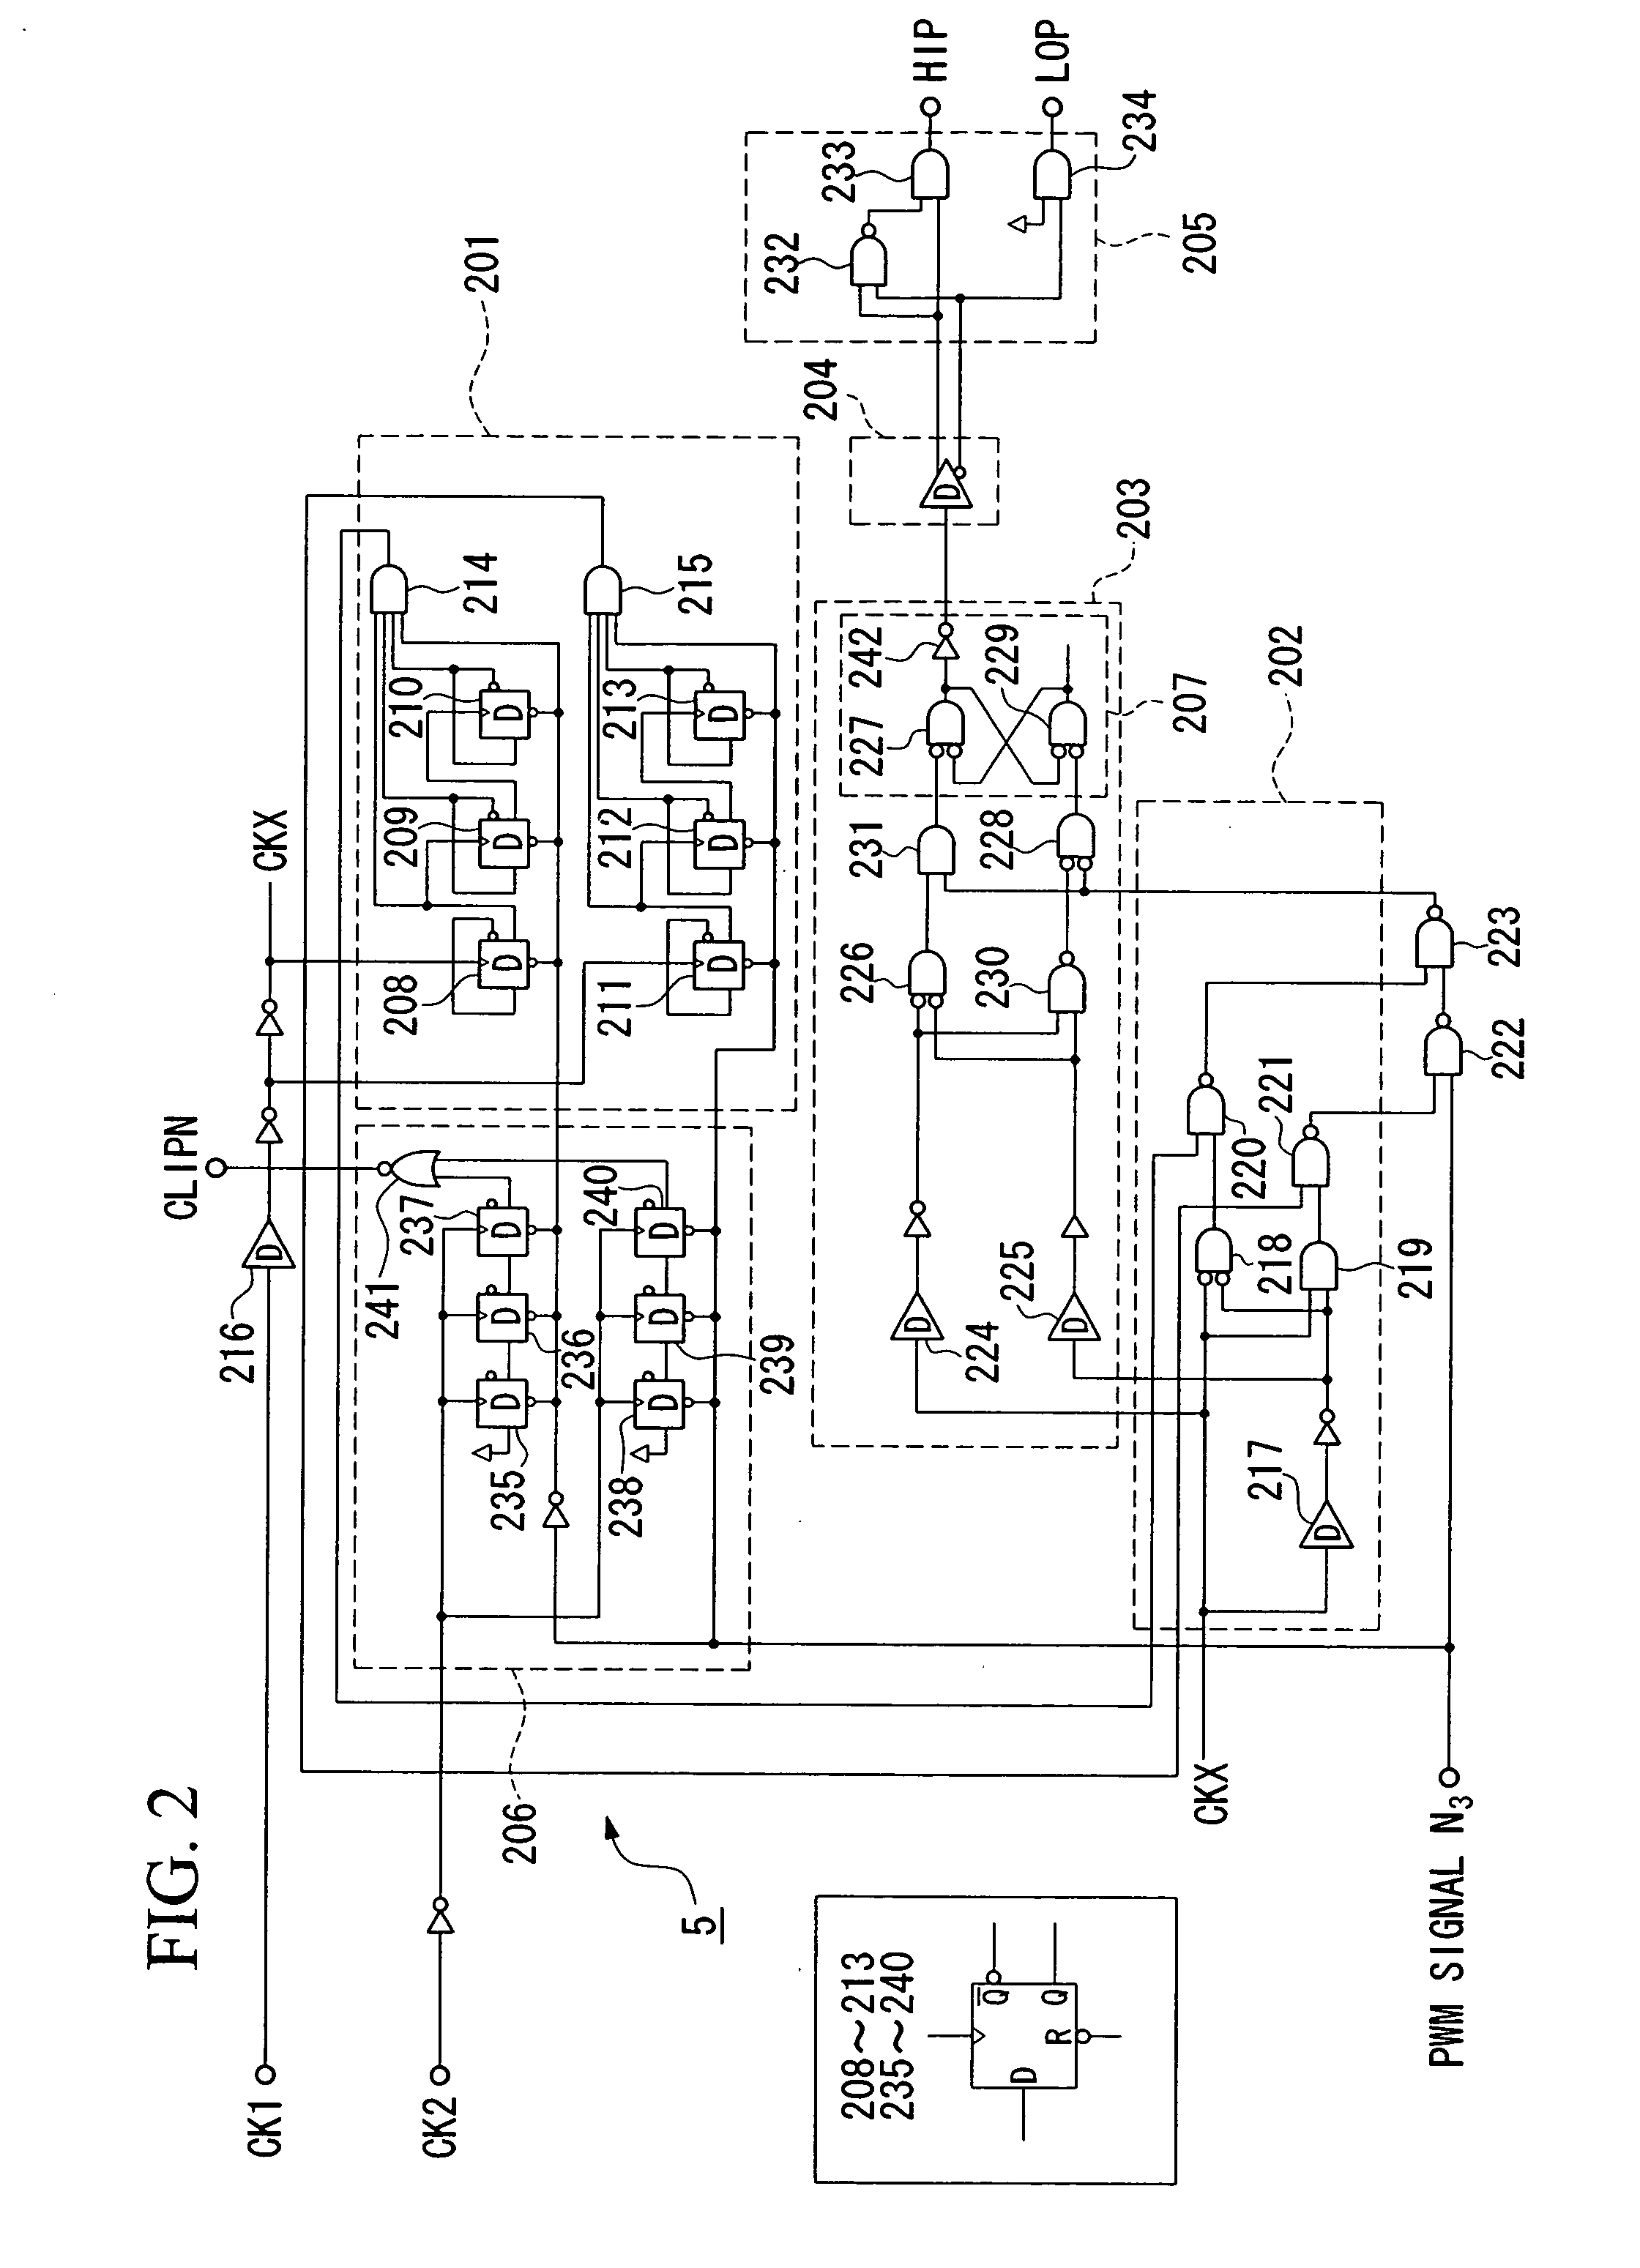 Pulse-width modulation amplifier and suppression of clipping therefor